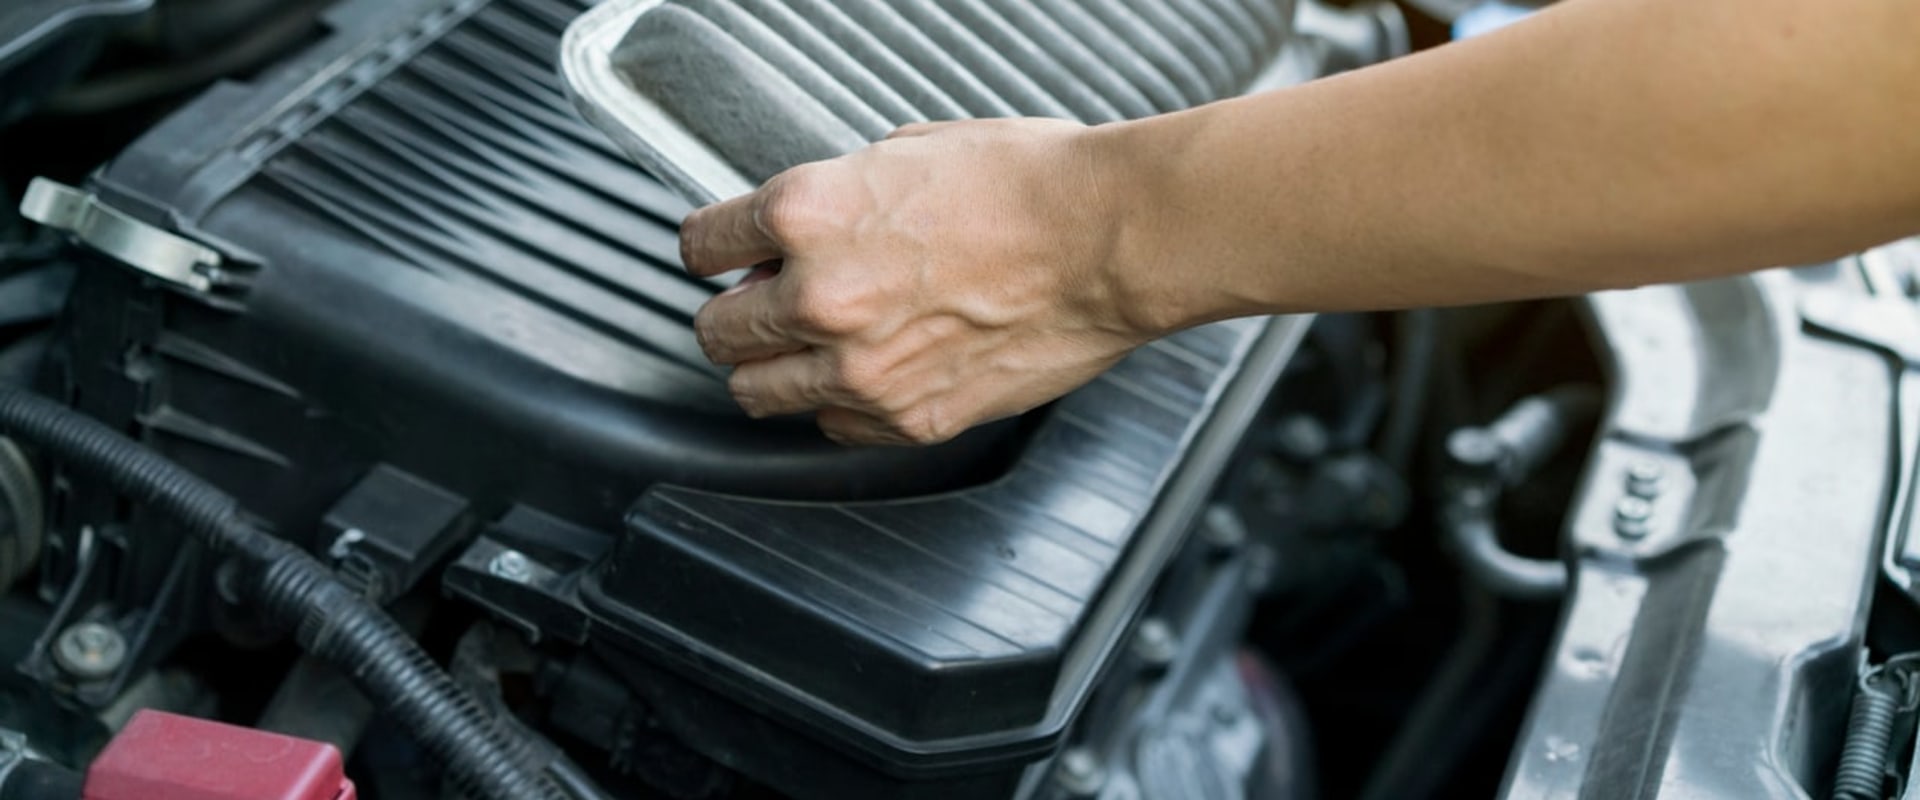 What Happens When an Air Filter is Not Installed Properly?